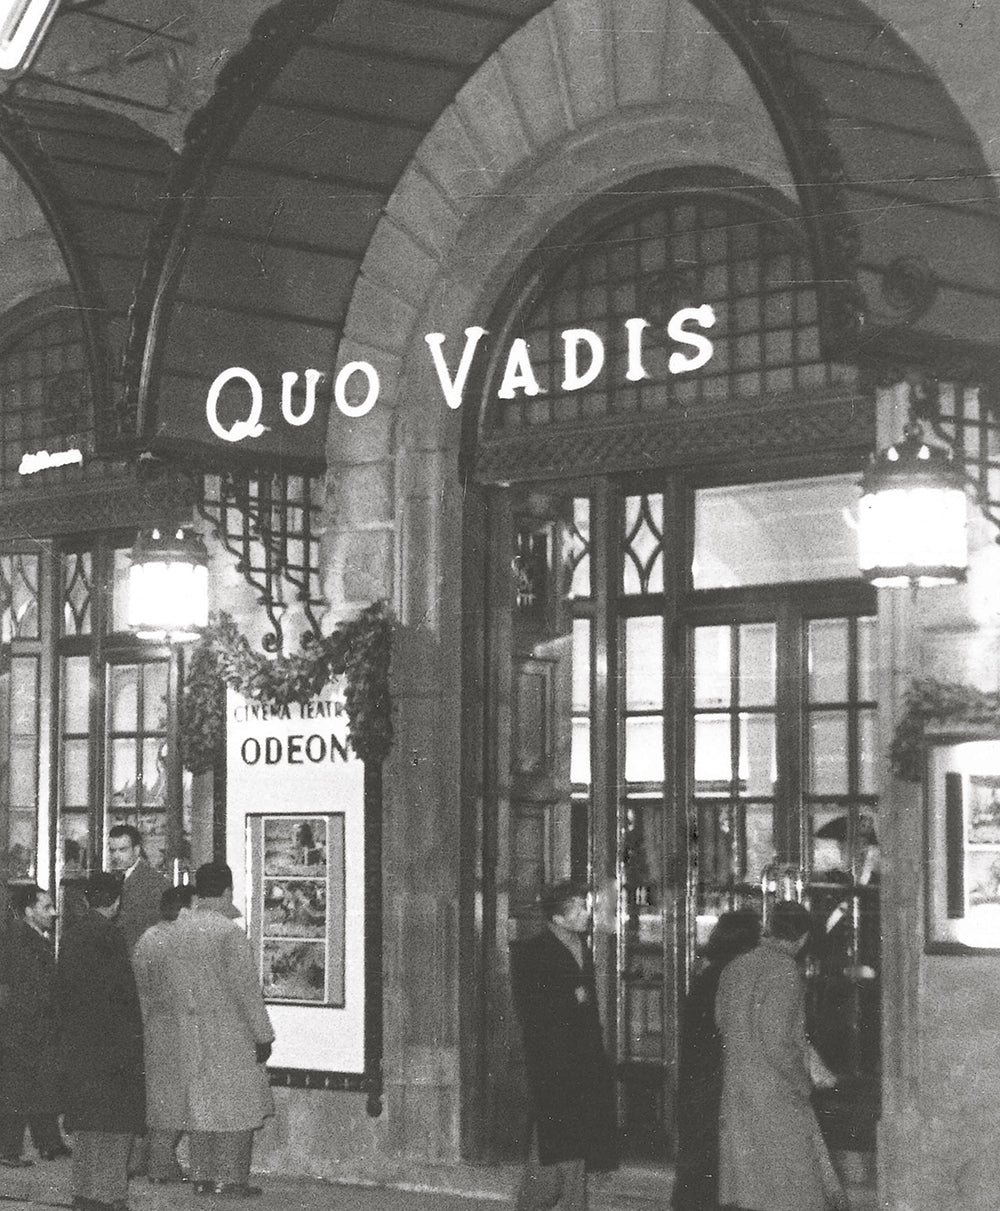 Odeon. A Century of Culture and Cinema